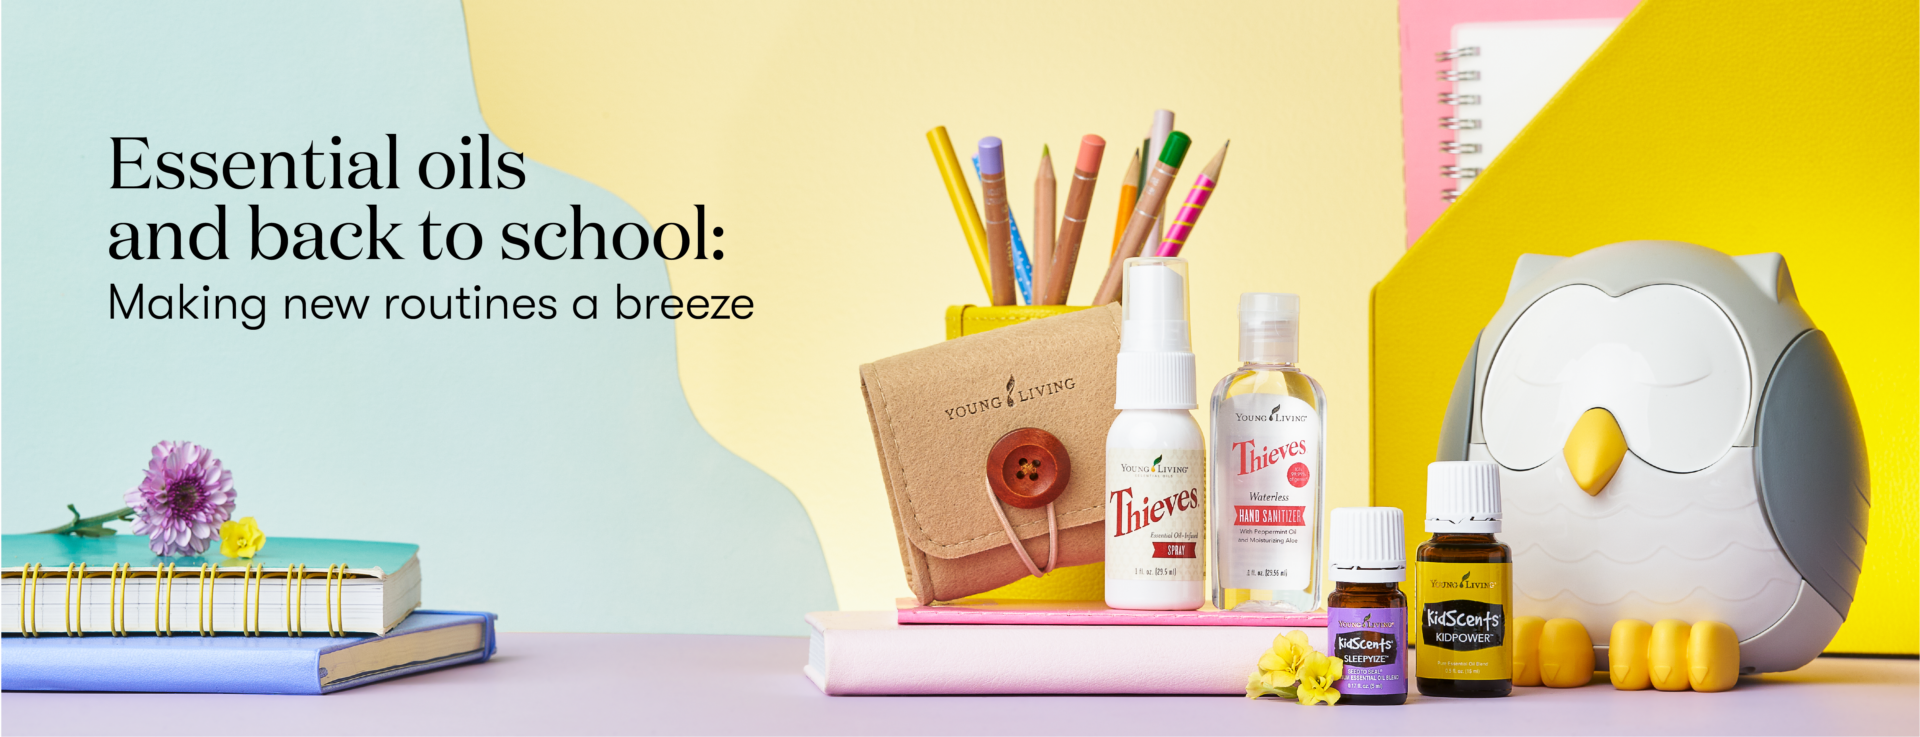 Essential oils and back to school: Making new routines a breeze - Young Living Lavender Life Blog